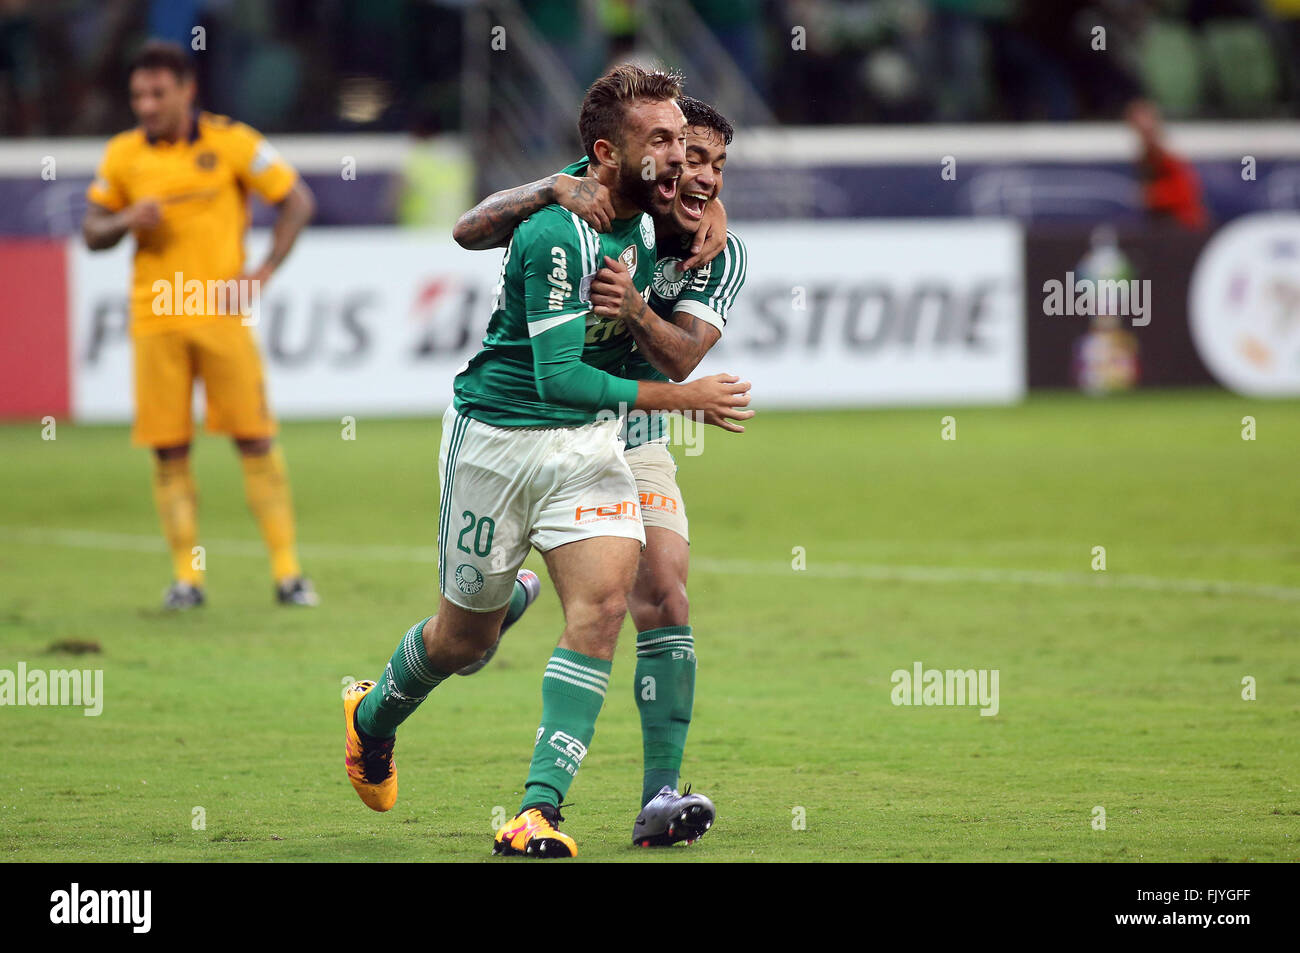 Sao Paulo, Brazil. 3rd Mar, 2016. Palmeiras' Agustin Allione (L), of Brazil, celebrates after scoring during the match of the group phase of the Libertadores Cup, against Rosario Central, of Argentina, held in the Allianz Park Stadium, in Sao Paulo, Brazil, on March 3, 2016. Palmeiras of Brazil won 2-0. © Rahel Patrasso/Xinhua/Alamy Live News Stock Photo